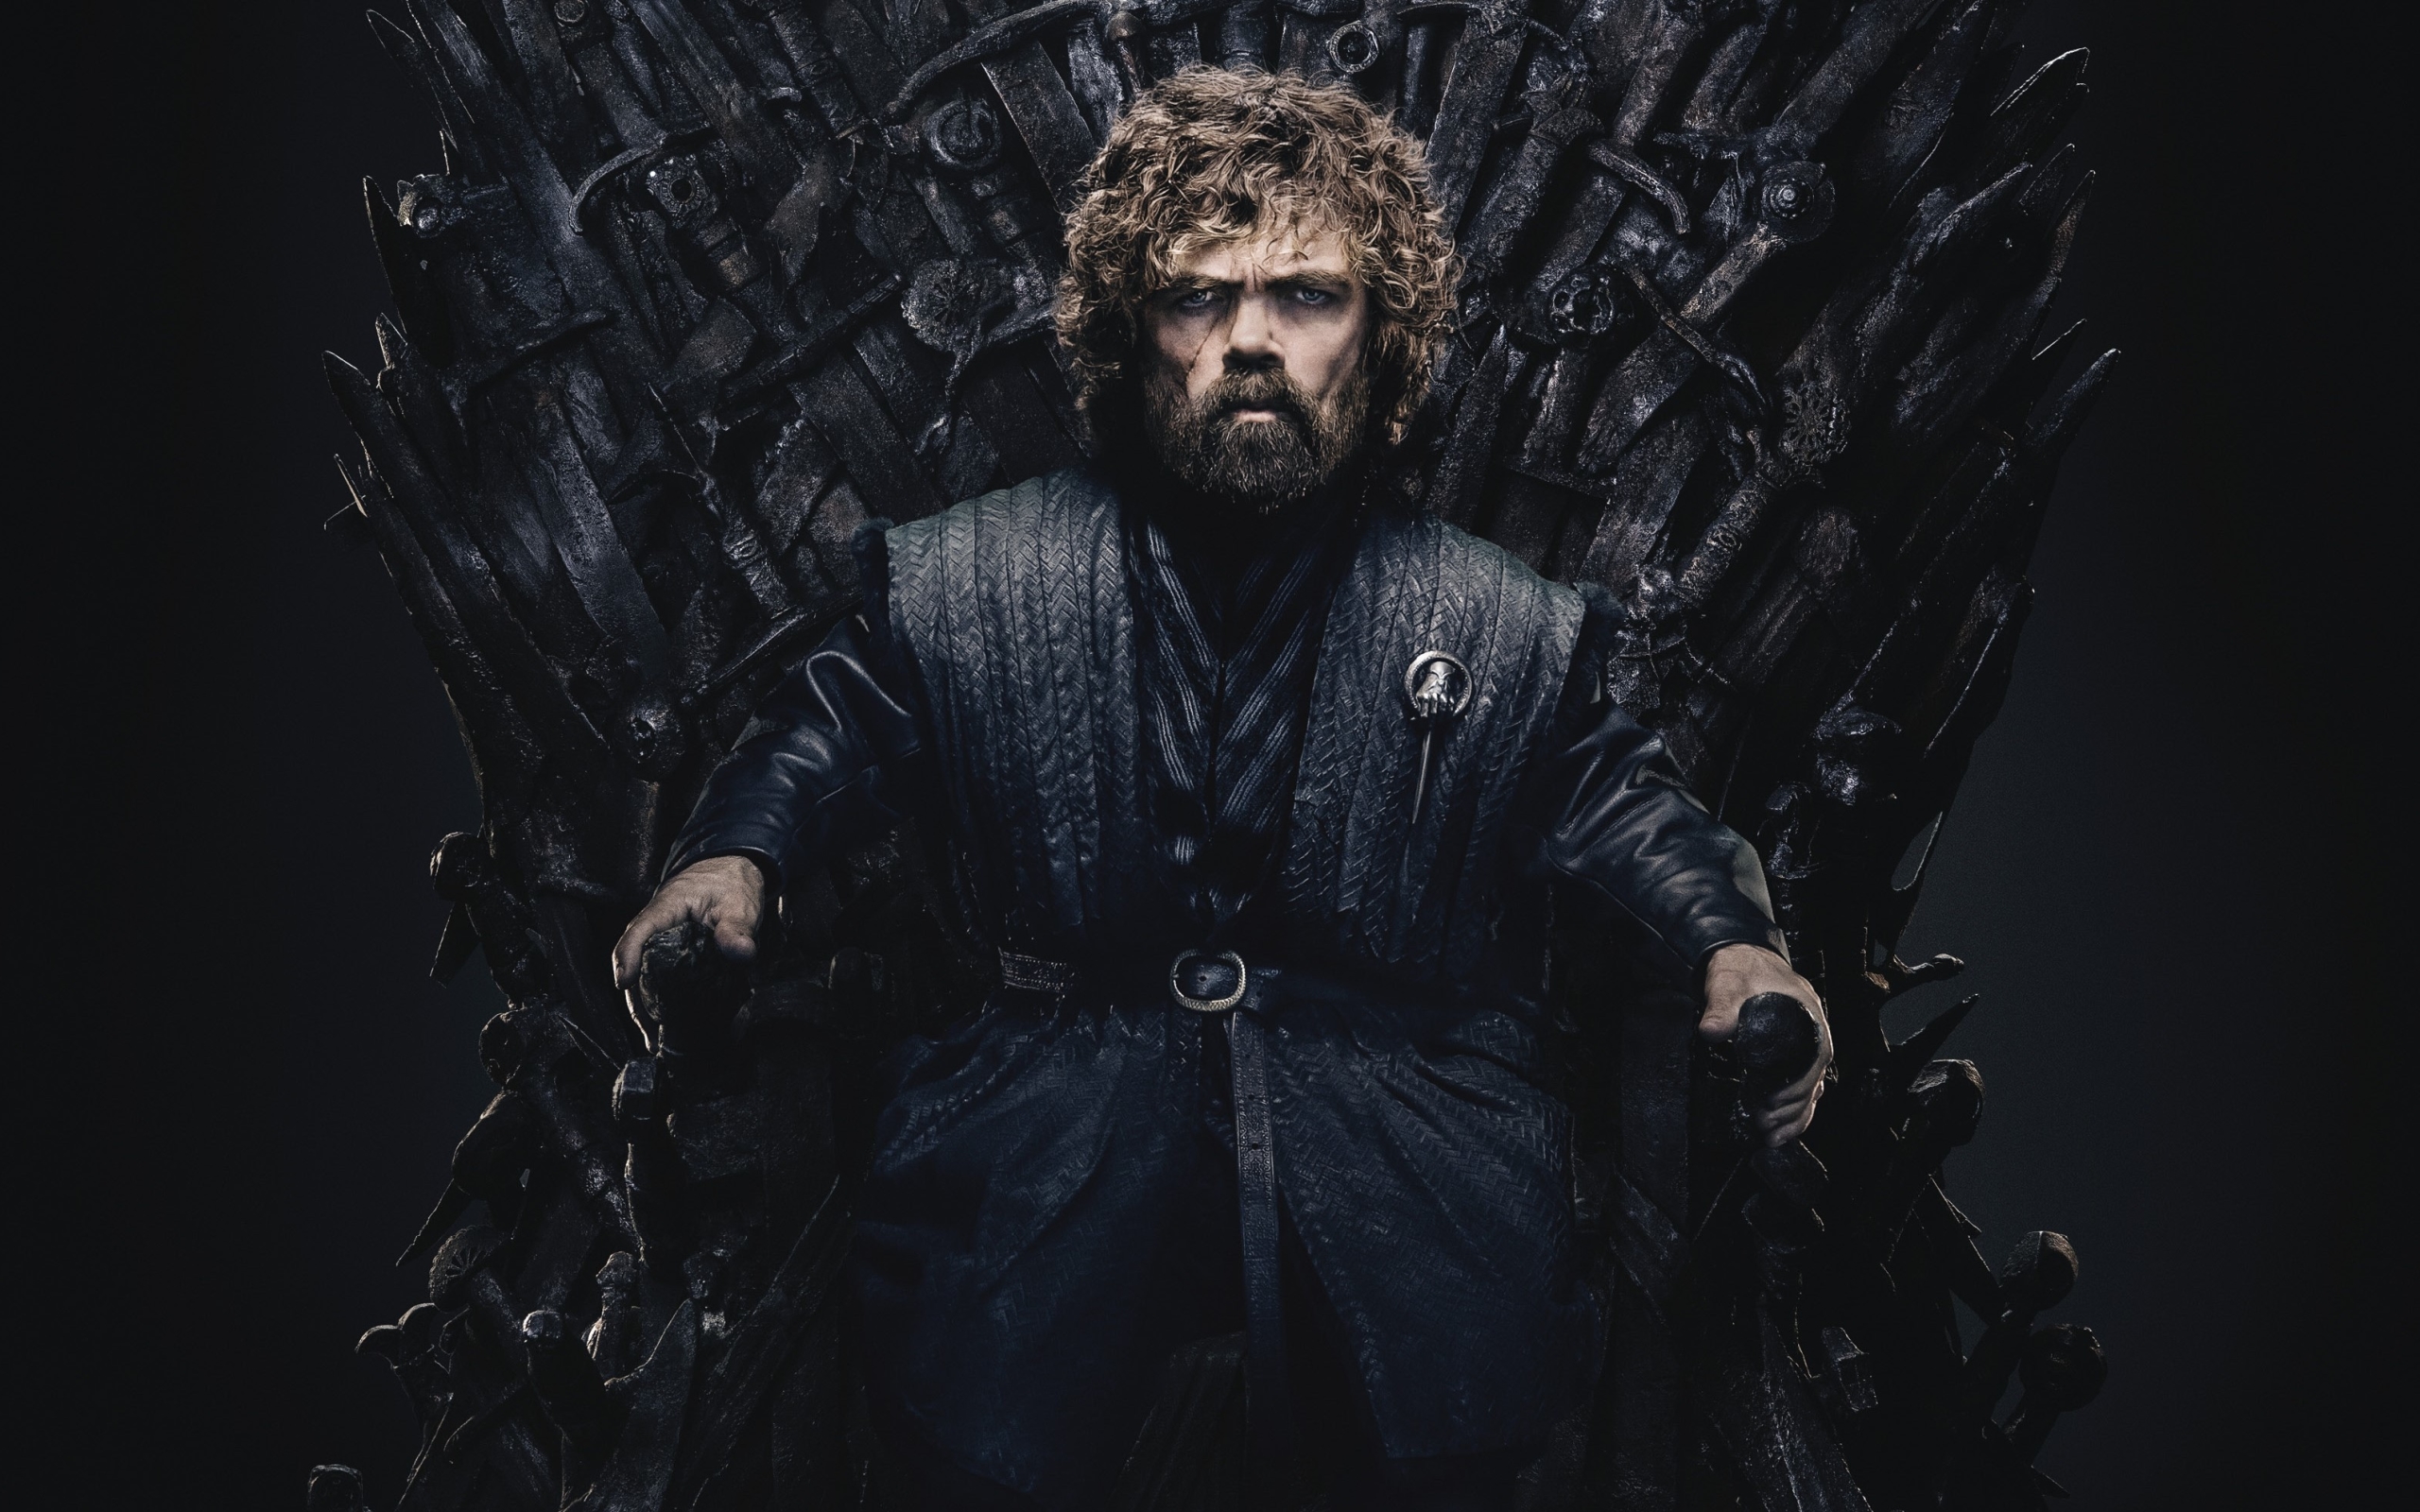 Wallpaper of Peter Dinklage Tyrion Lannister Game of Thrones